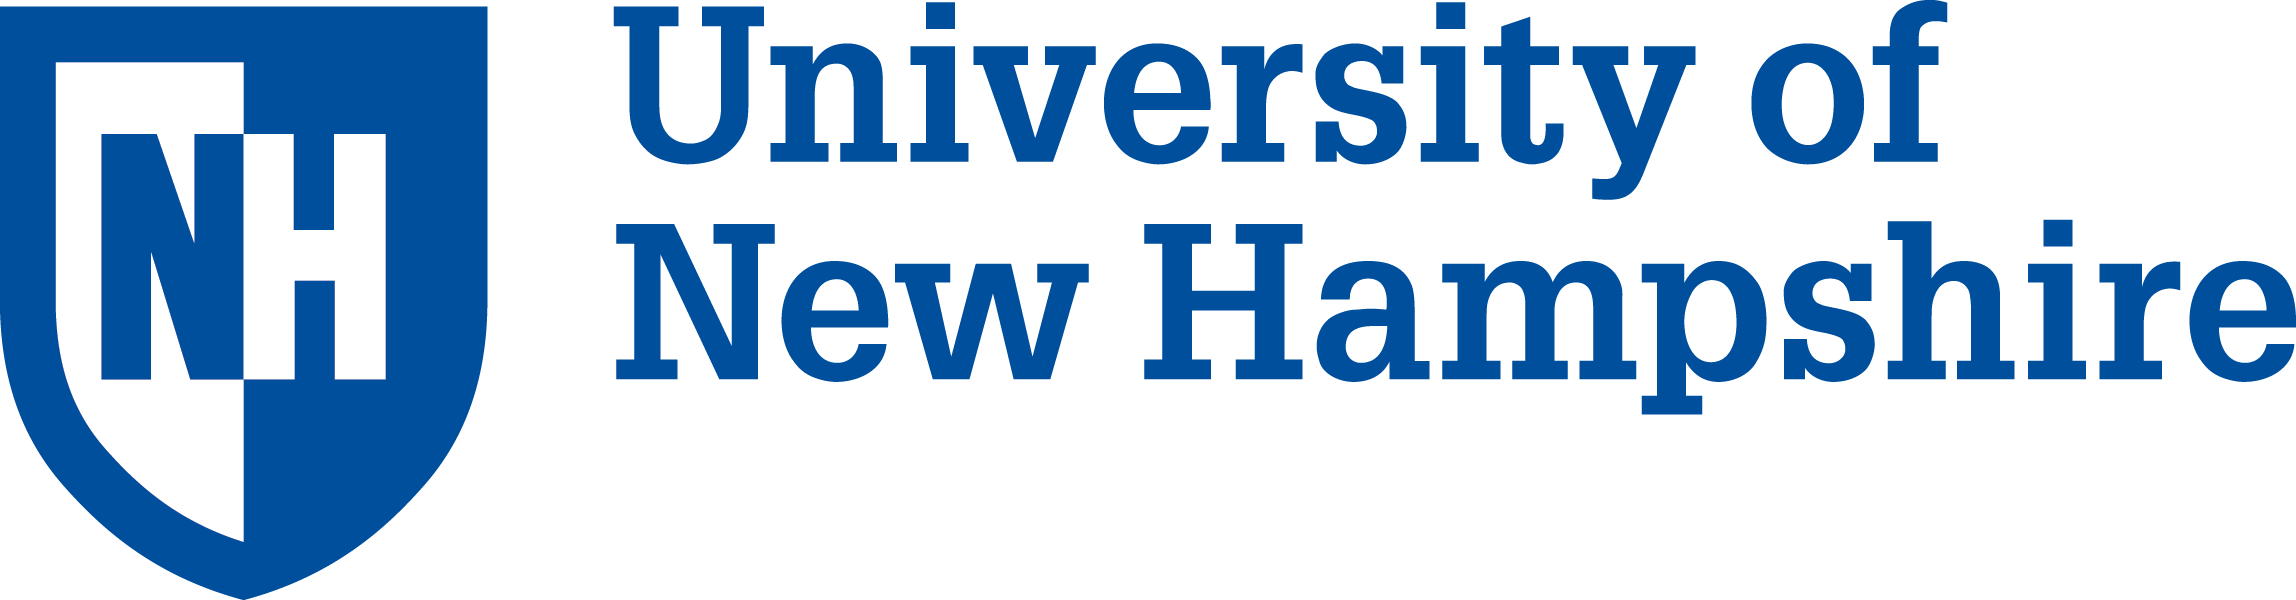 UNH logo being used as a link to the University of New Hampshire home page